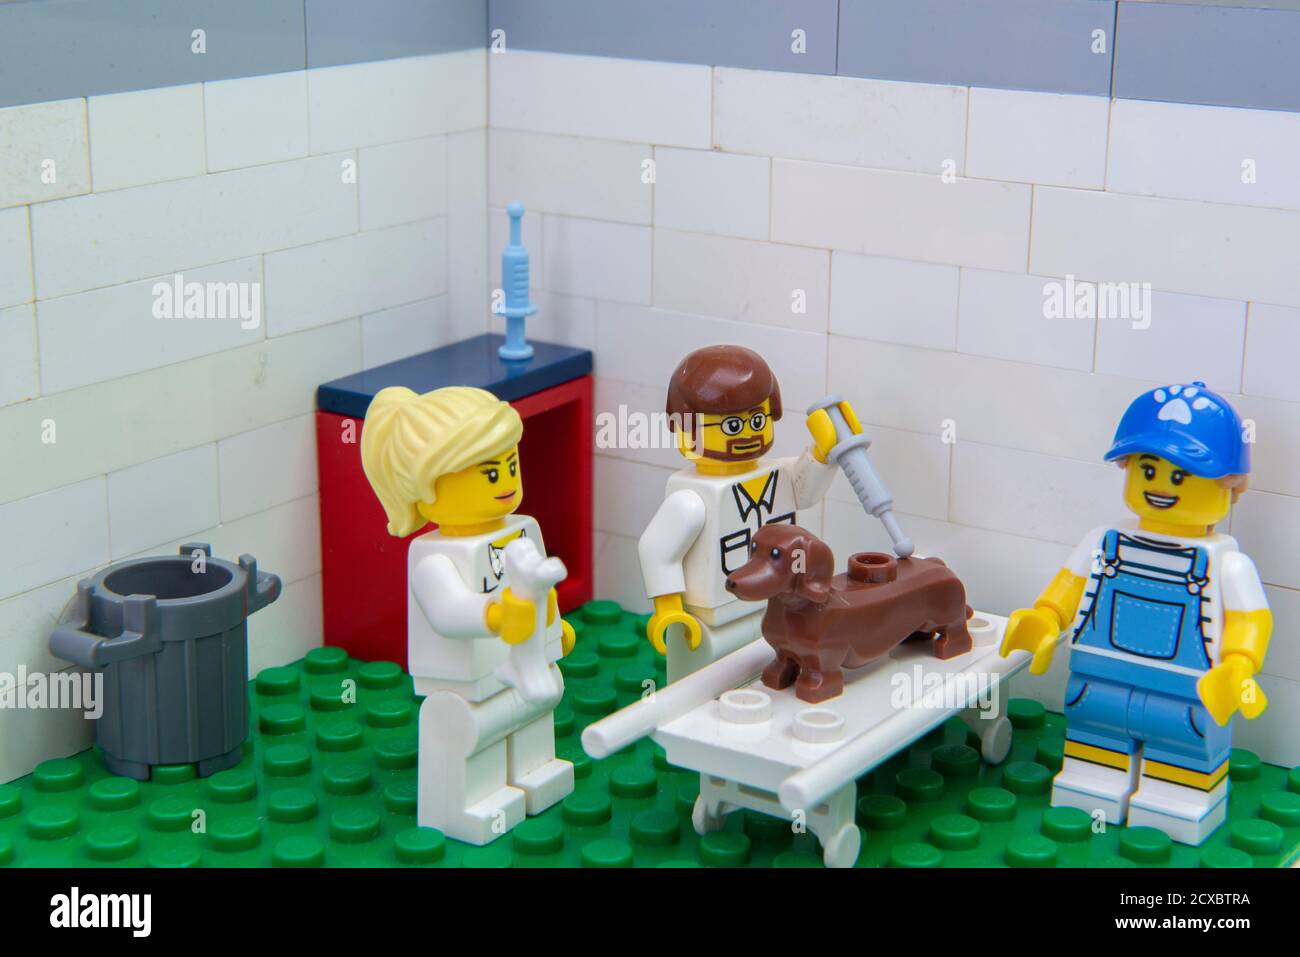 Florianopolis, Brazil. September 19, 2020: Vet minifigure giving injection to a Dachshund dog while a nurse distracts him with a bone at clinic. Conce Stock Photo